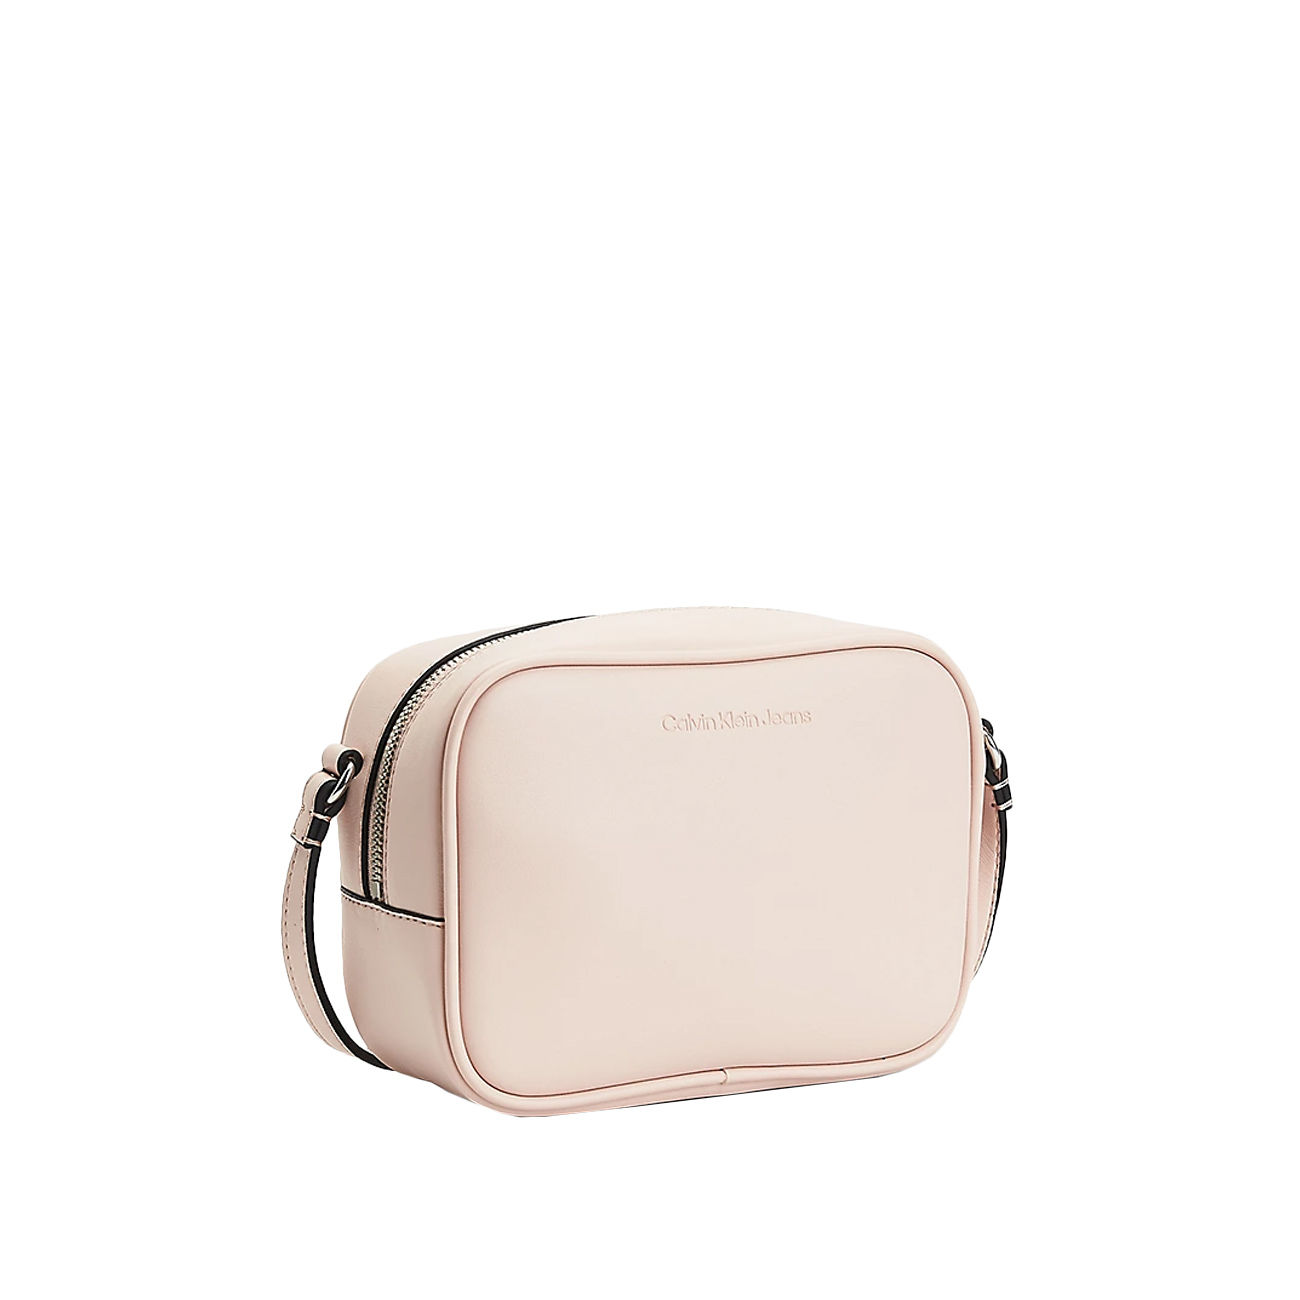 CHARLES & KEITH Small curved pink boxy sling bag